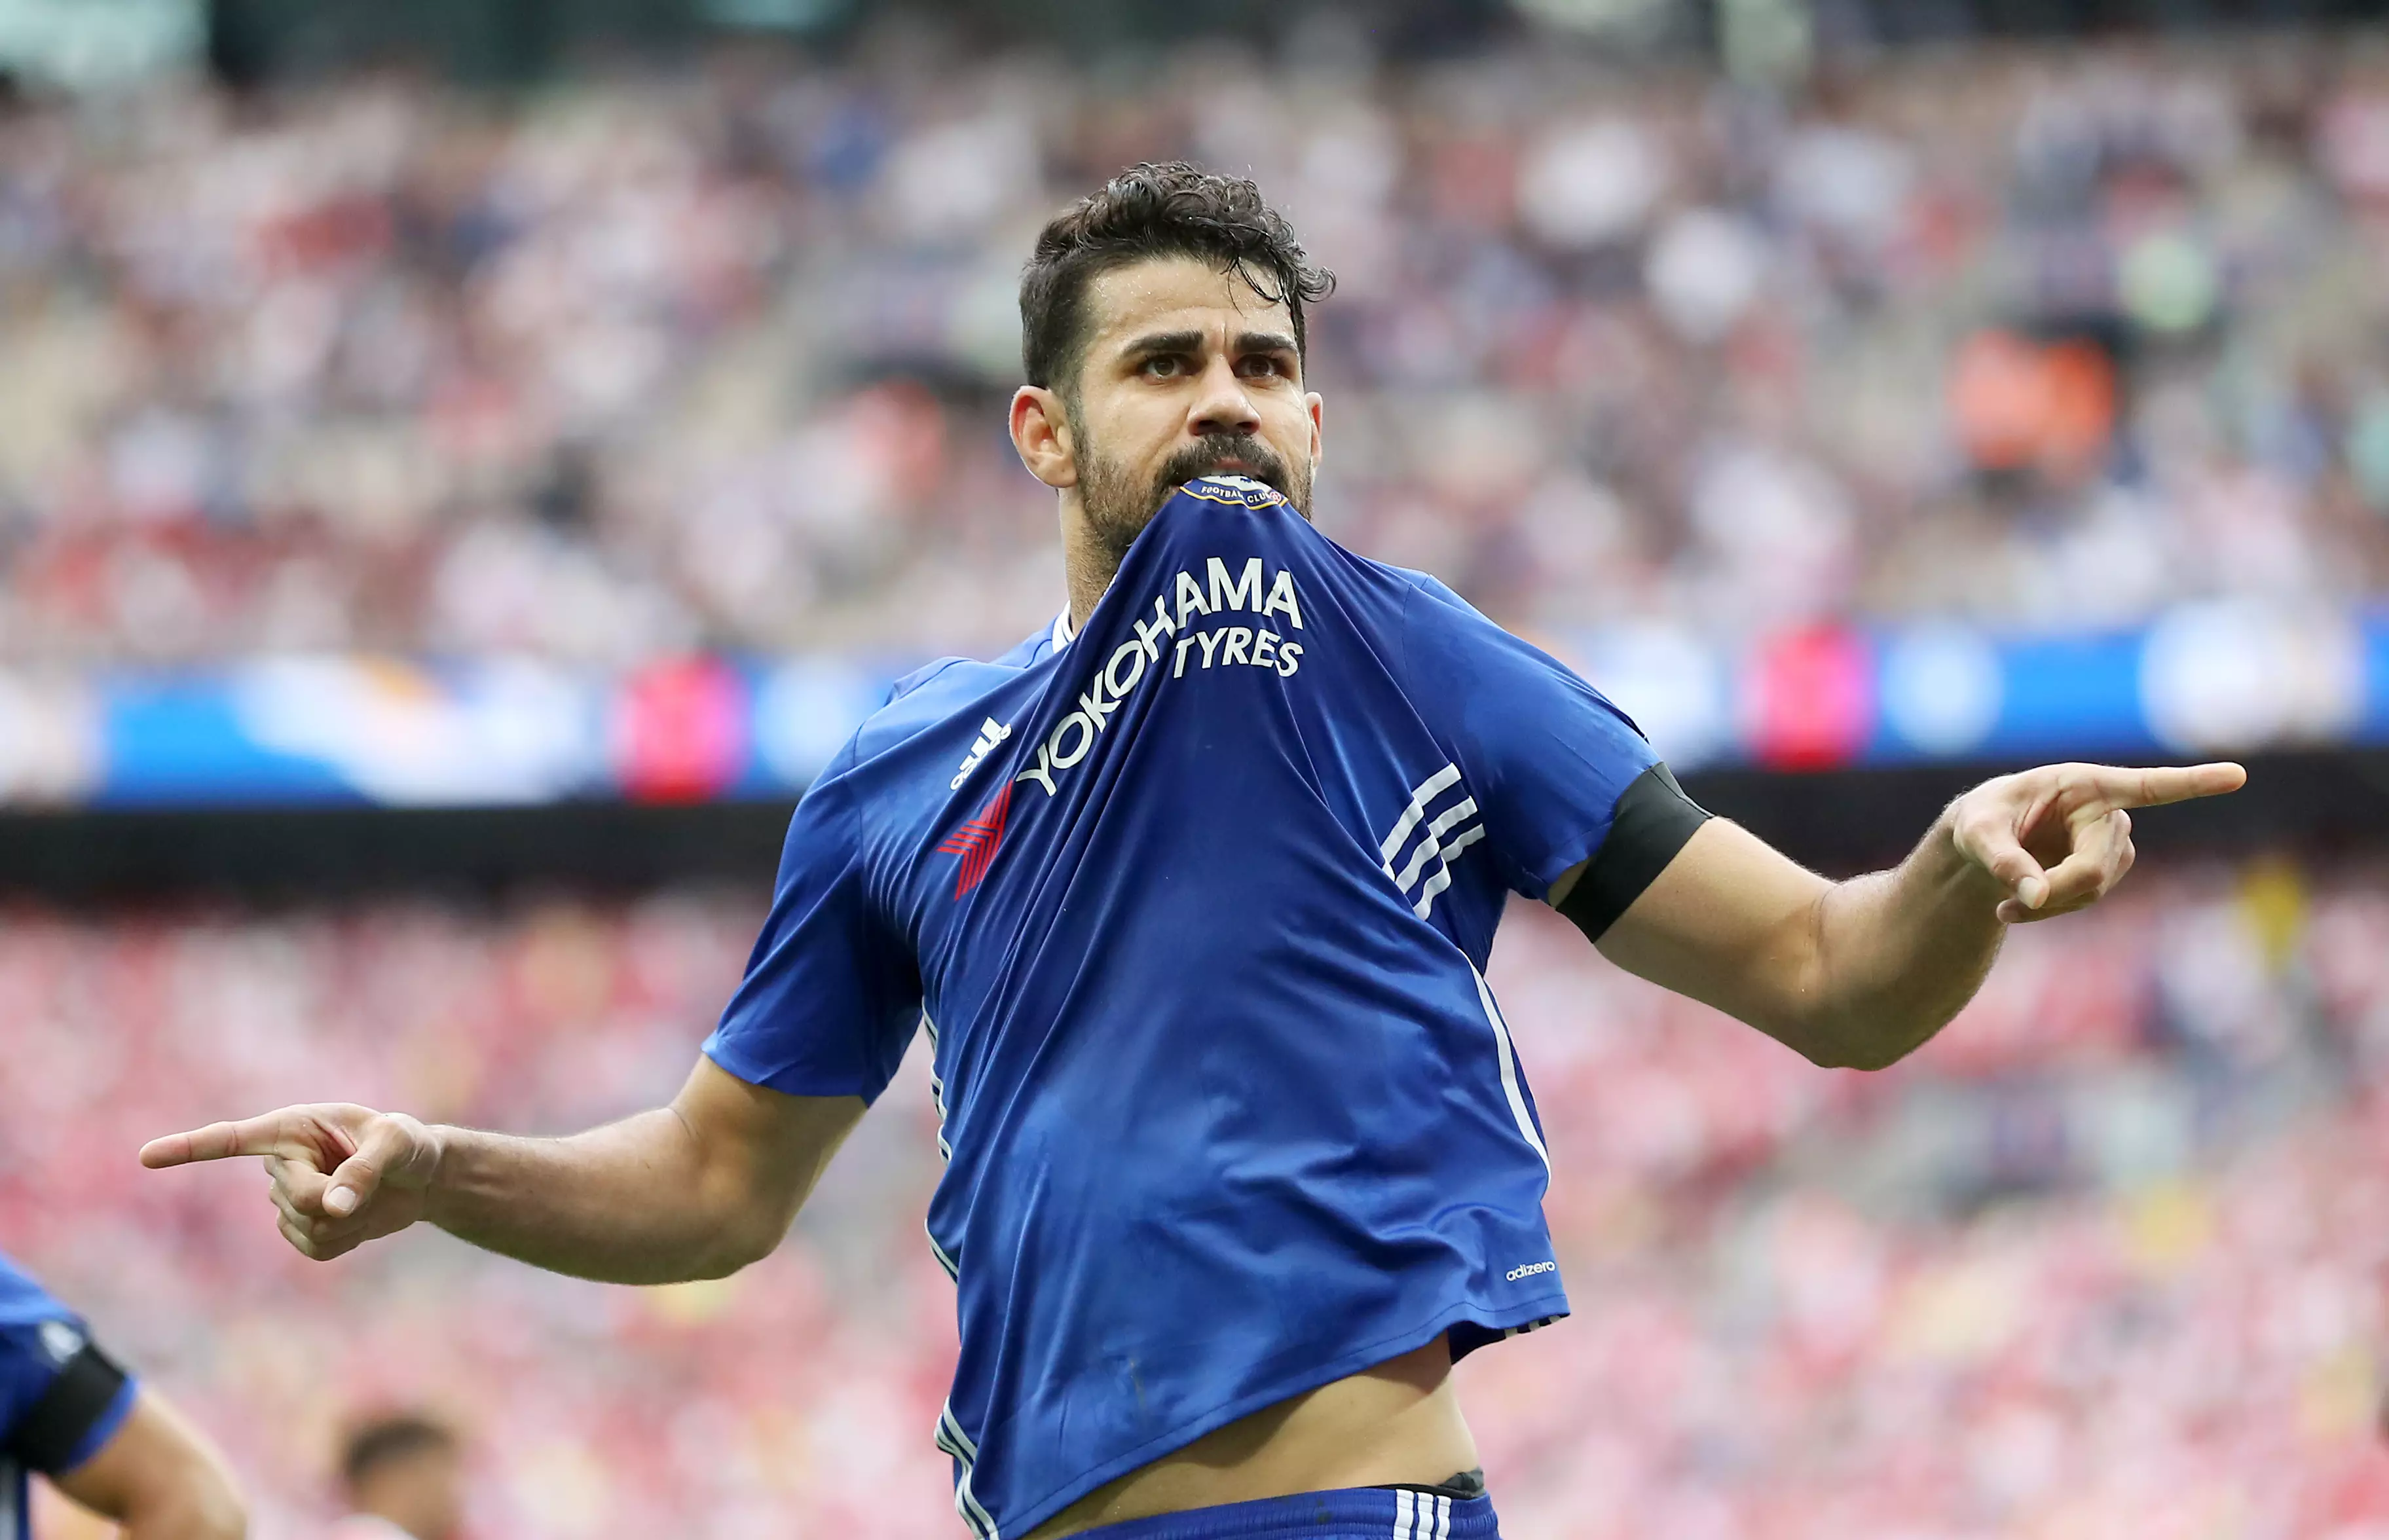 Costa had an excellent spell in the Premier League. Image: PA Images